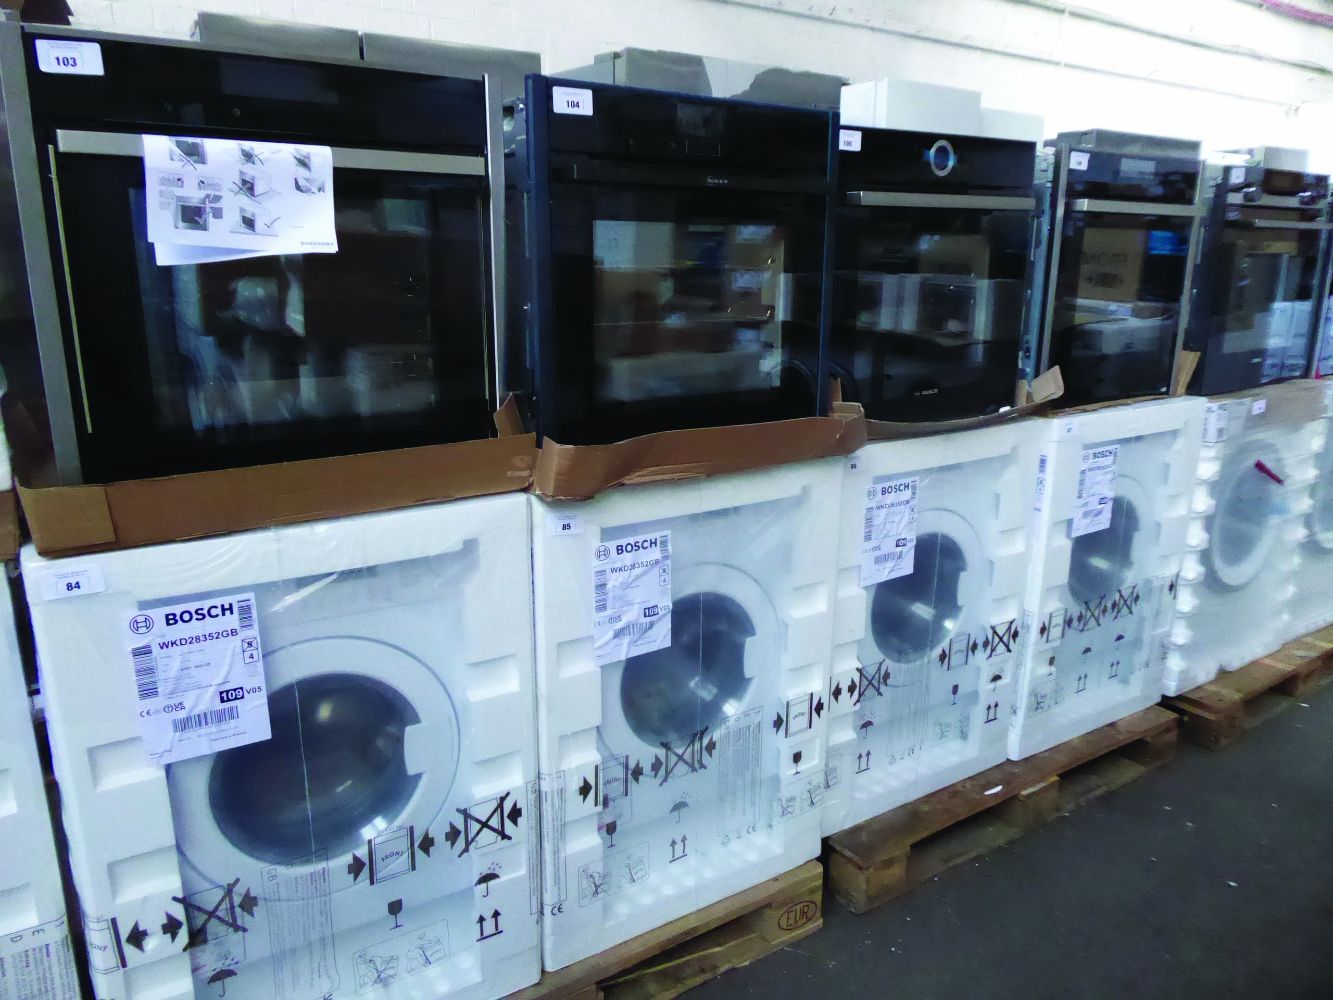 Domestic Cooking, Laundry & Refrigeration Appliances